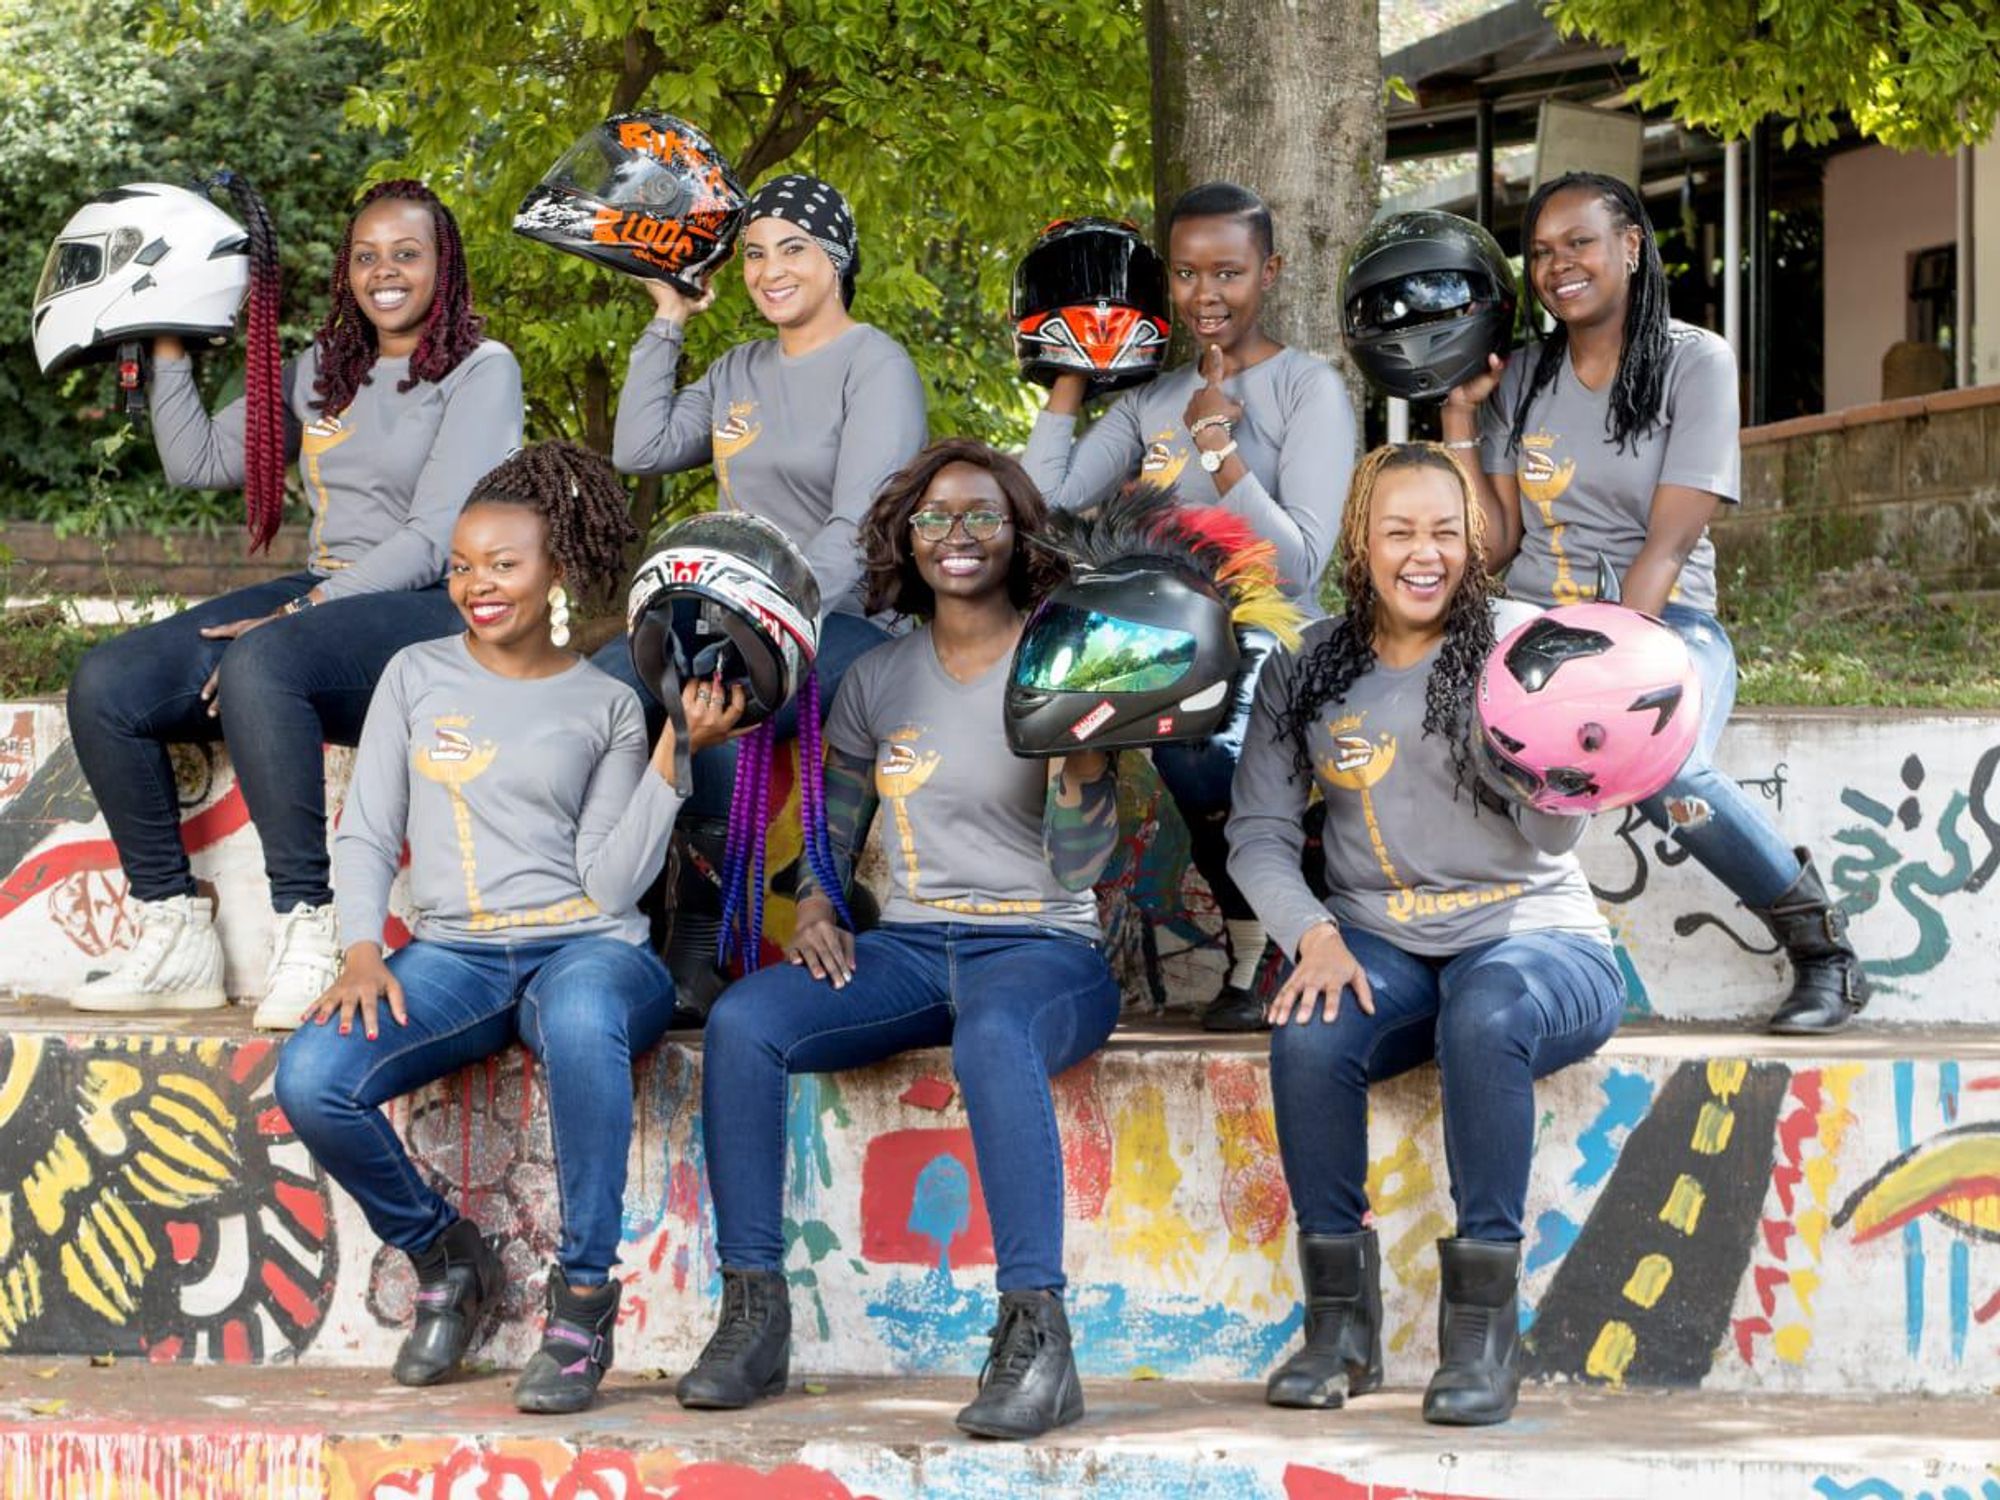 A group of women pose with their motorcycle helmets